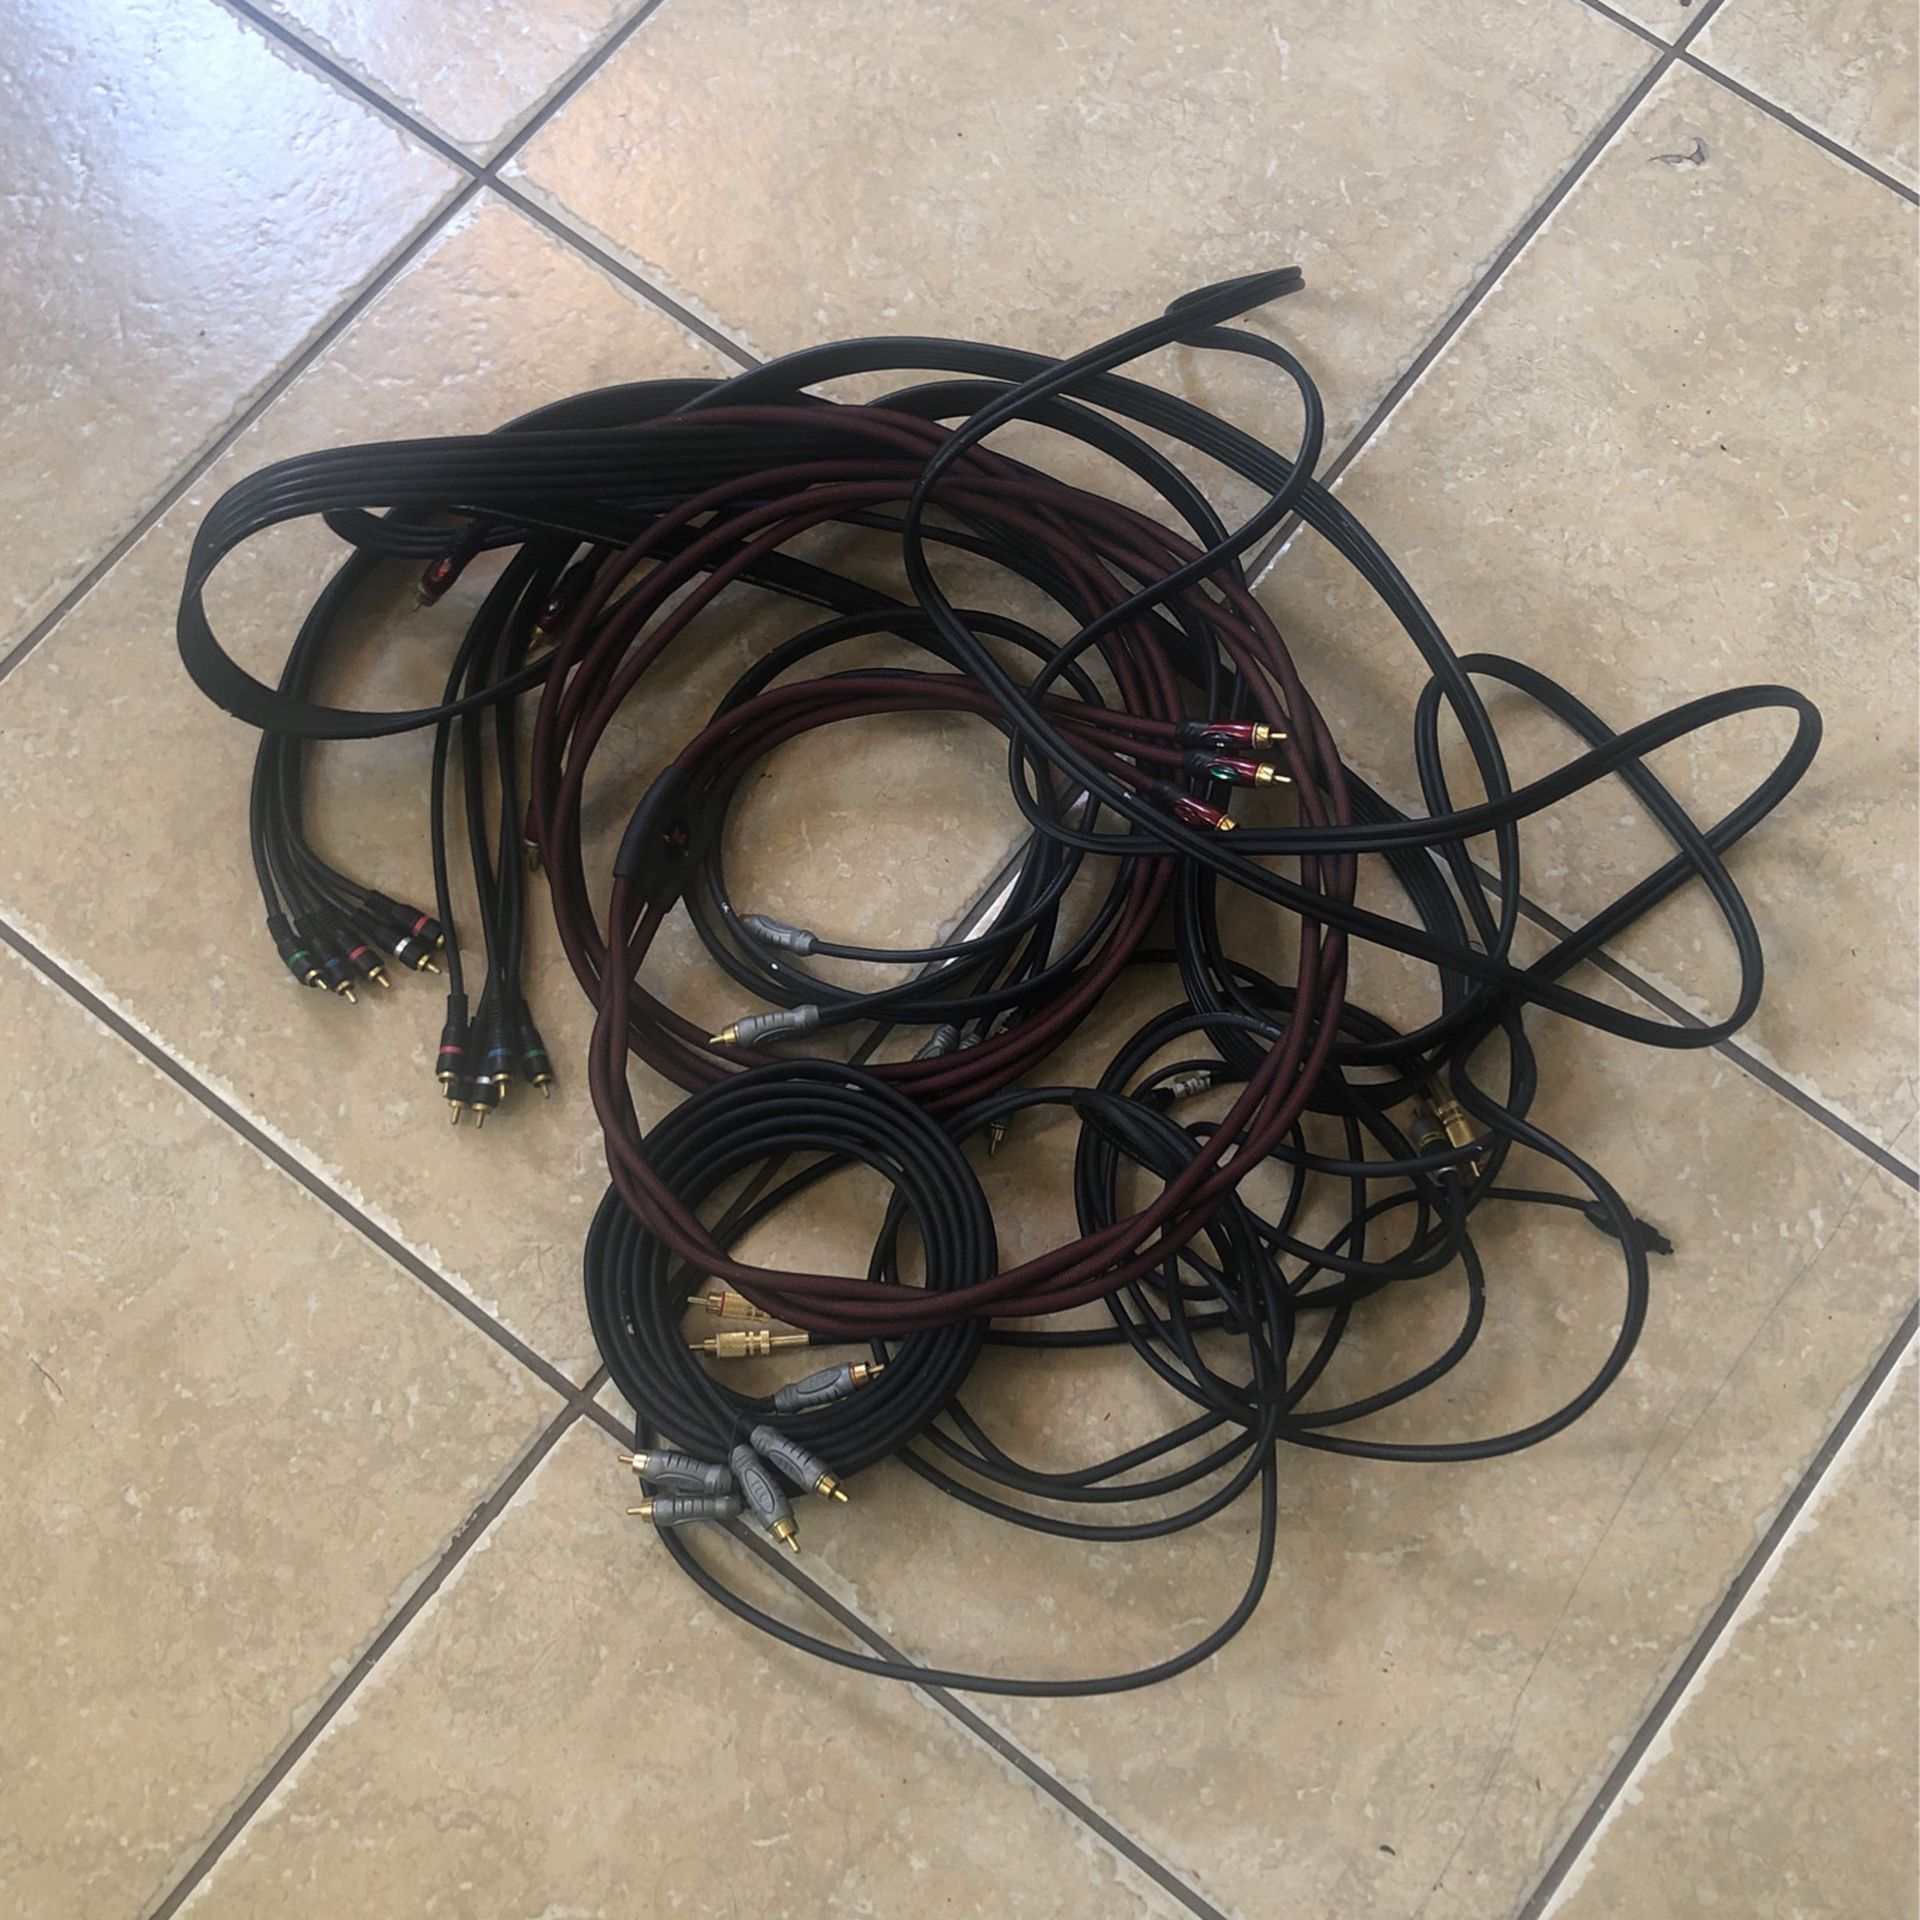 Monster audio adapter cables